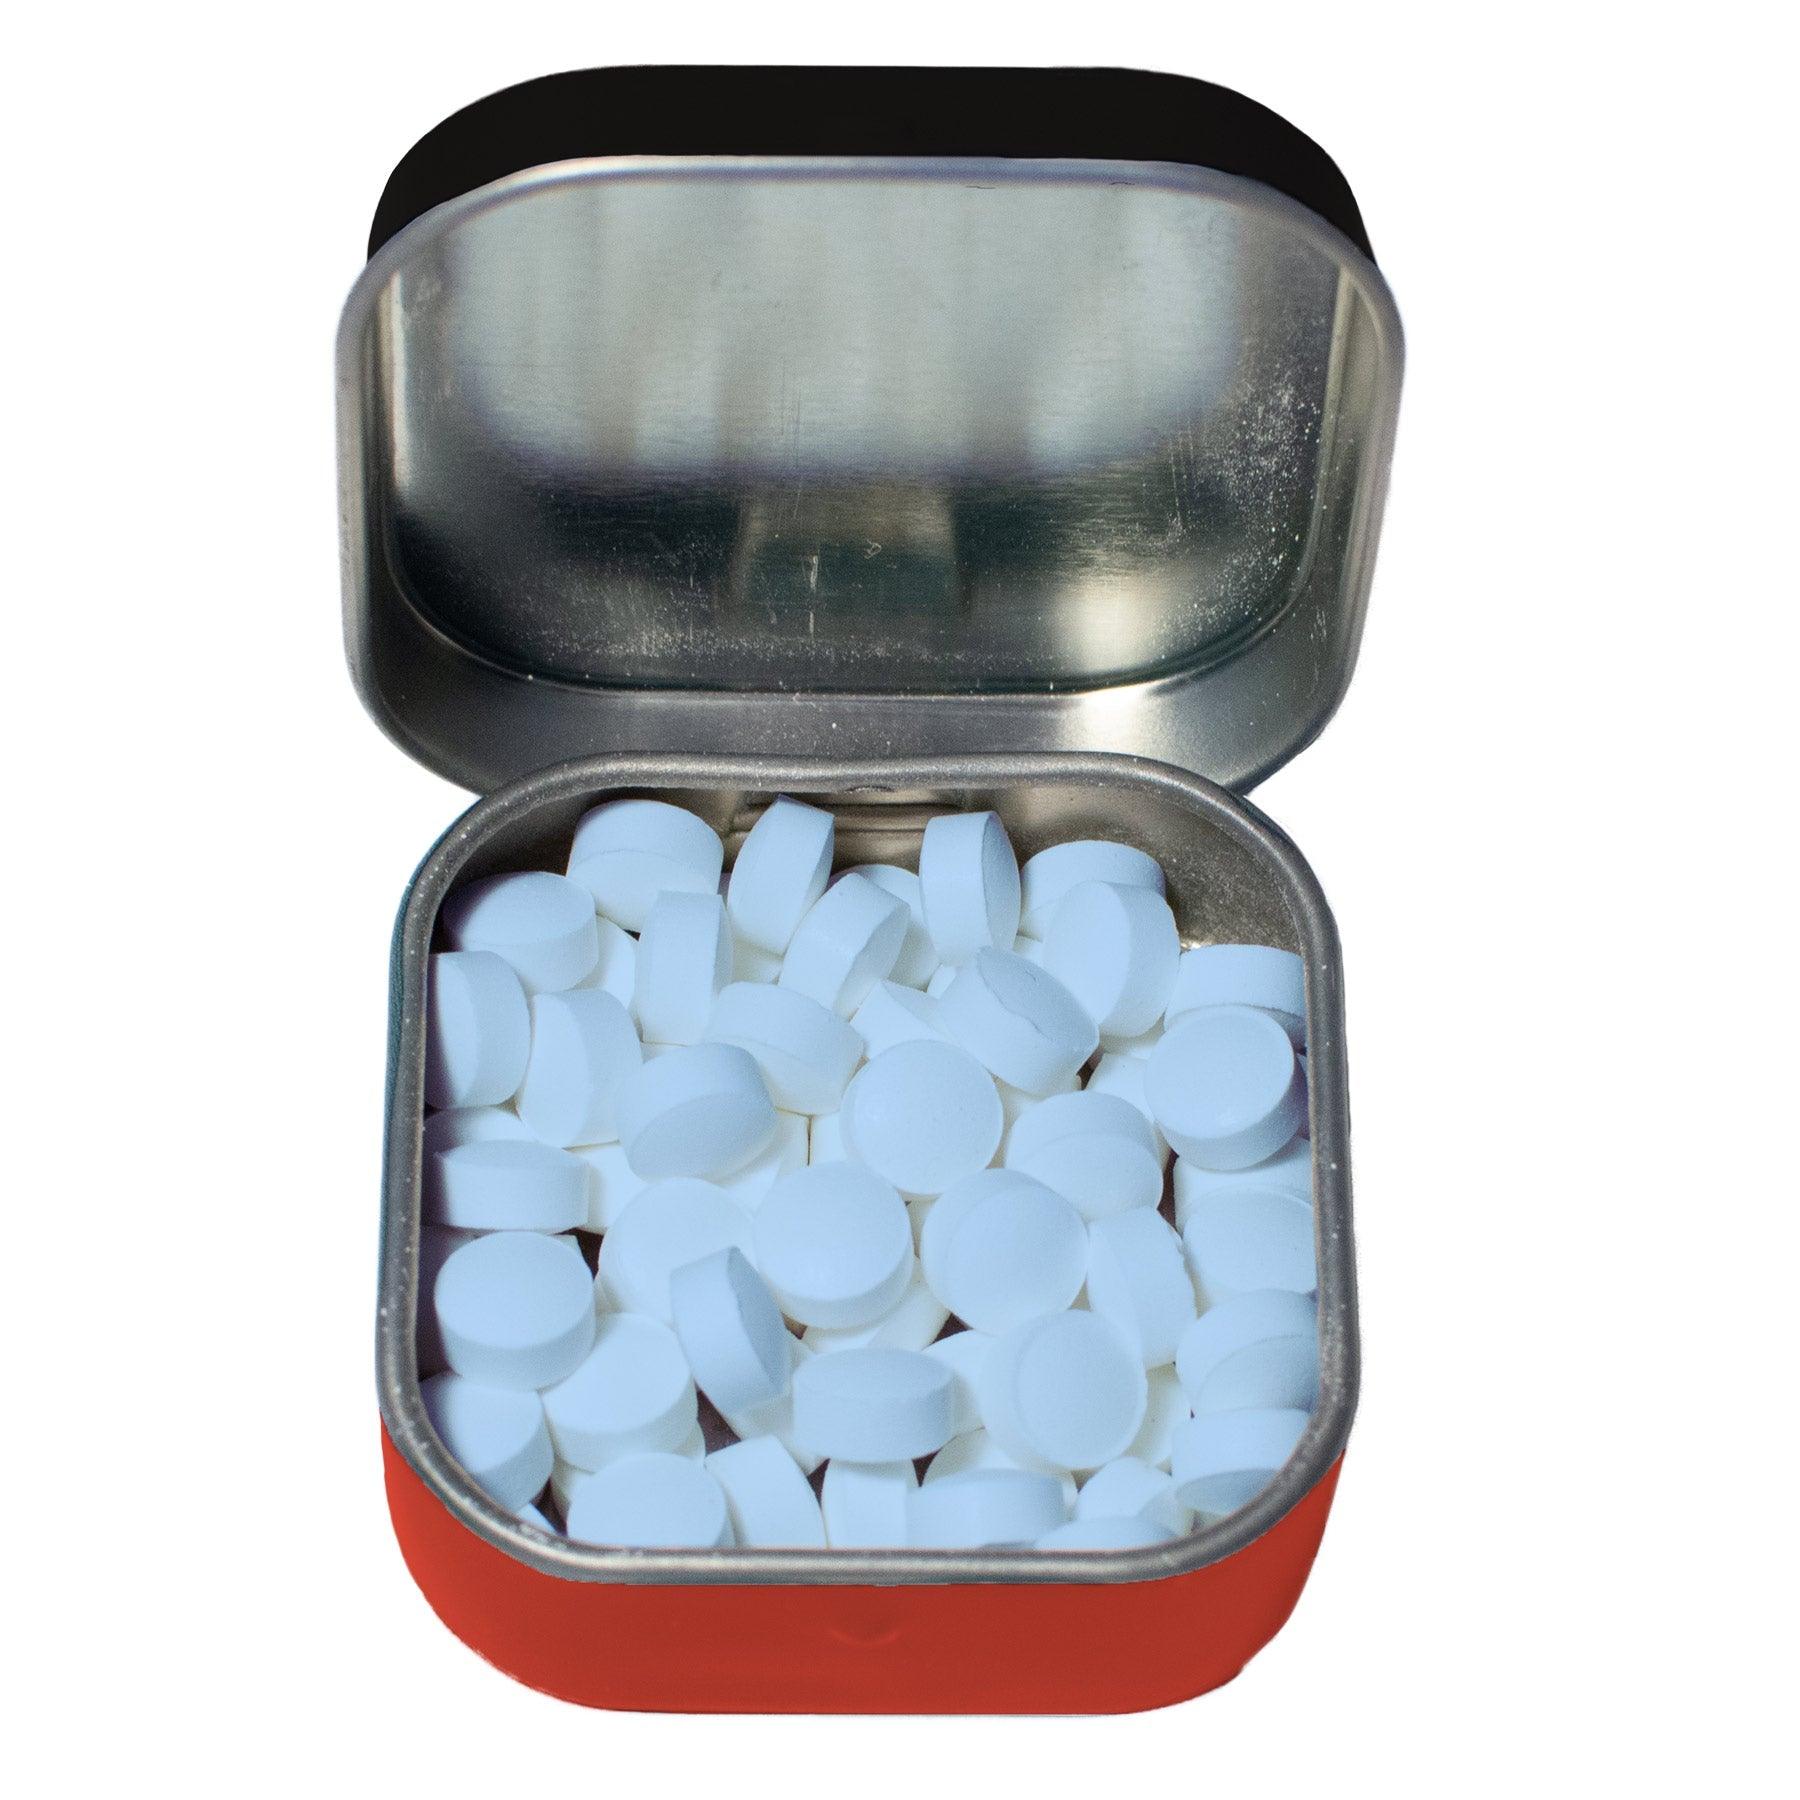 Product photo of Edgar Allan Poe's Tell Tale Mints, a novelty gift manufactured by The Unemployed Philosophers Guild.